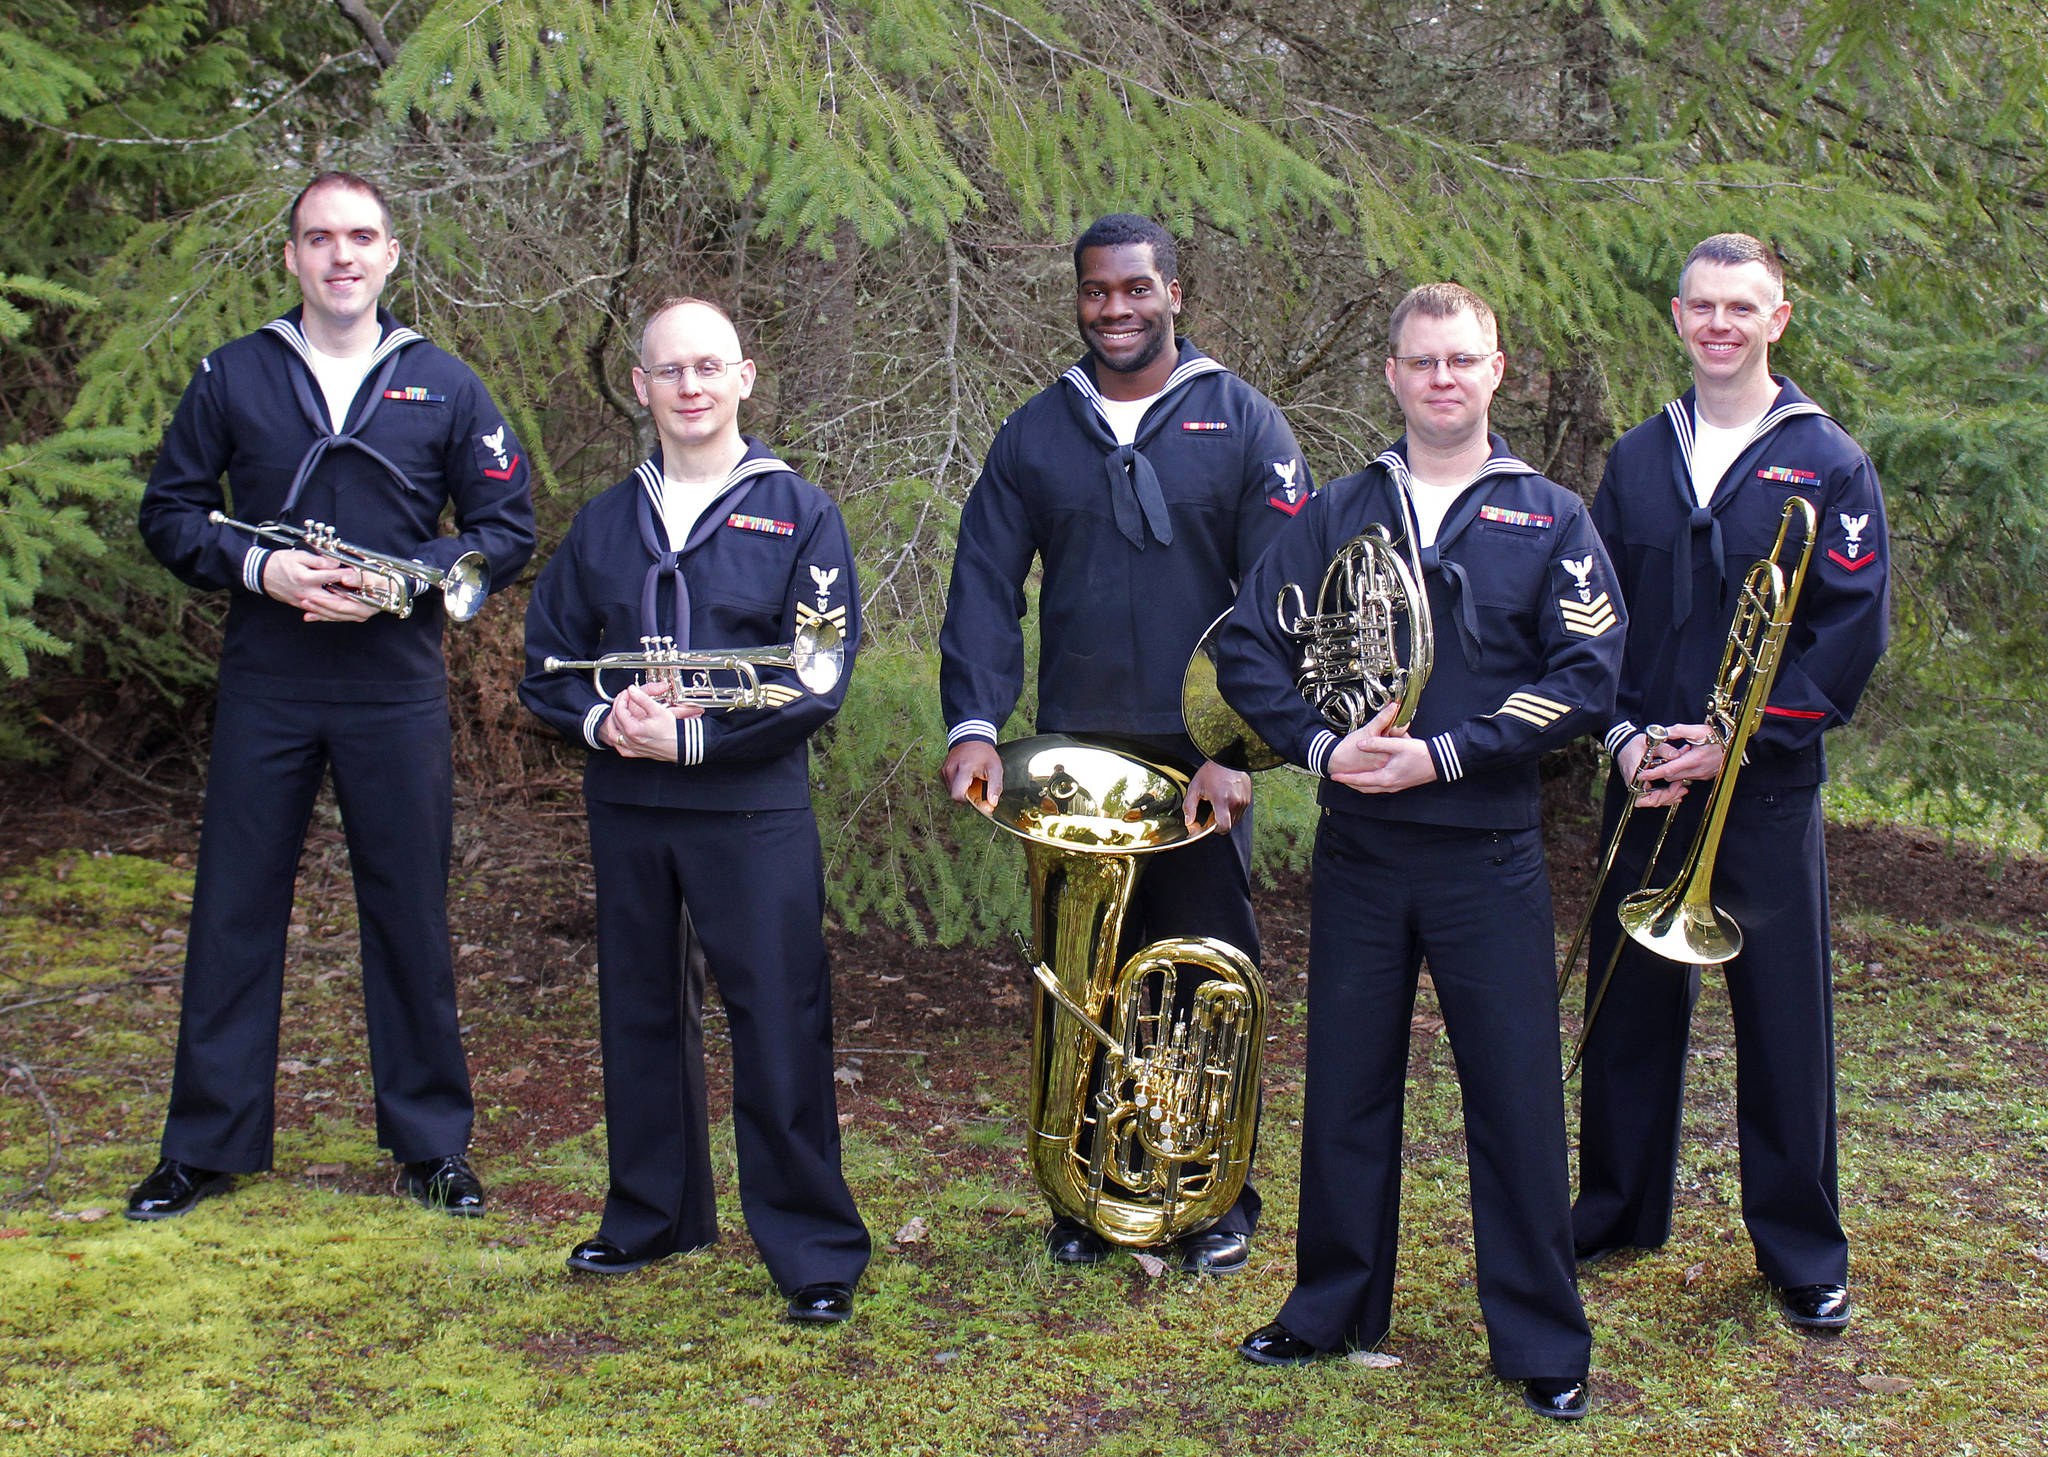 Five Star Brass, a brass quintet of the Navy Band Northwest, joins the Sequim City Band at its first indoor concert of the 2017-18 season.